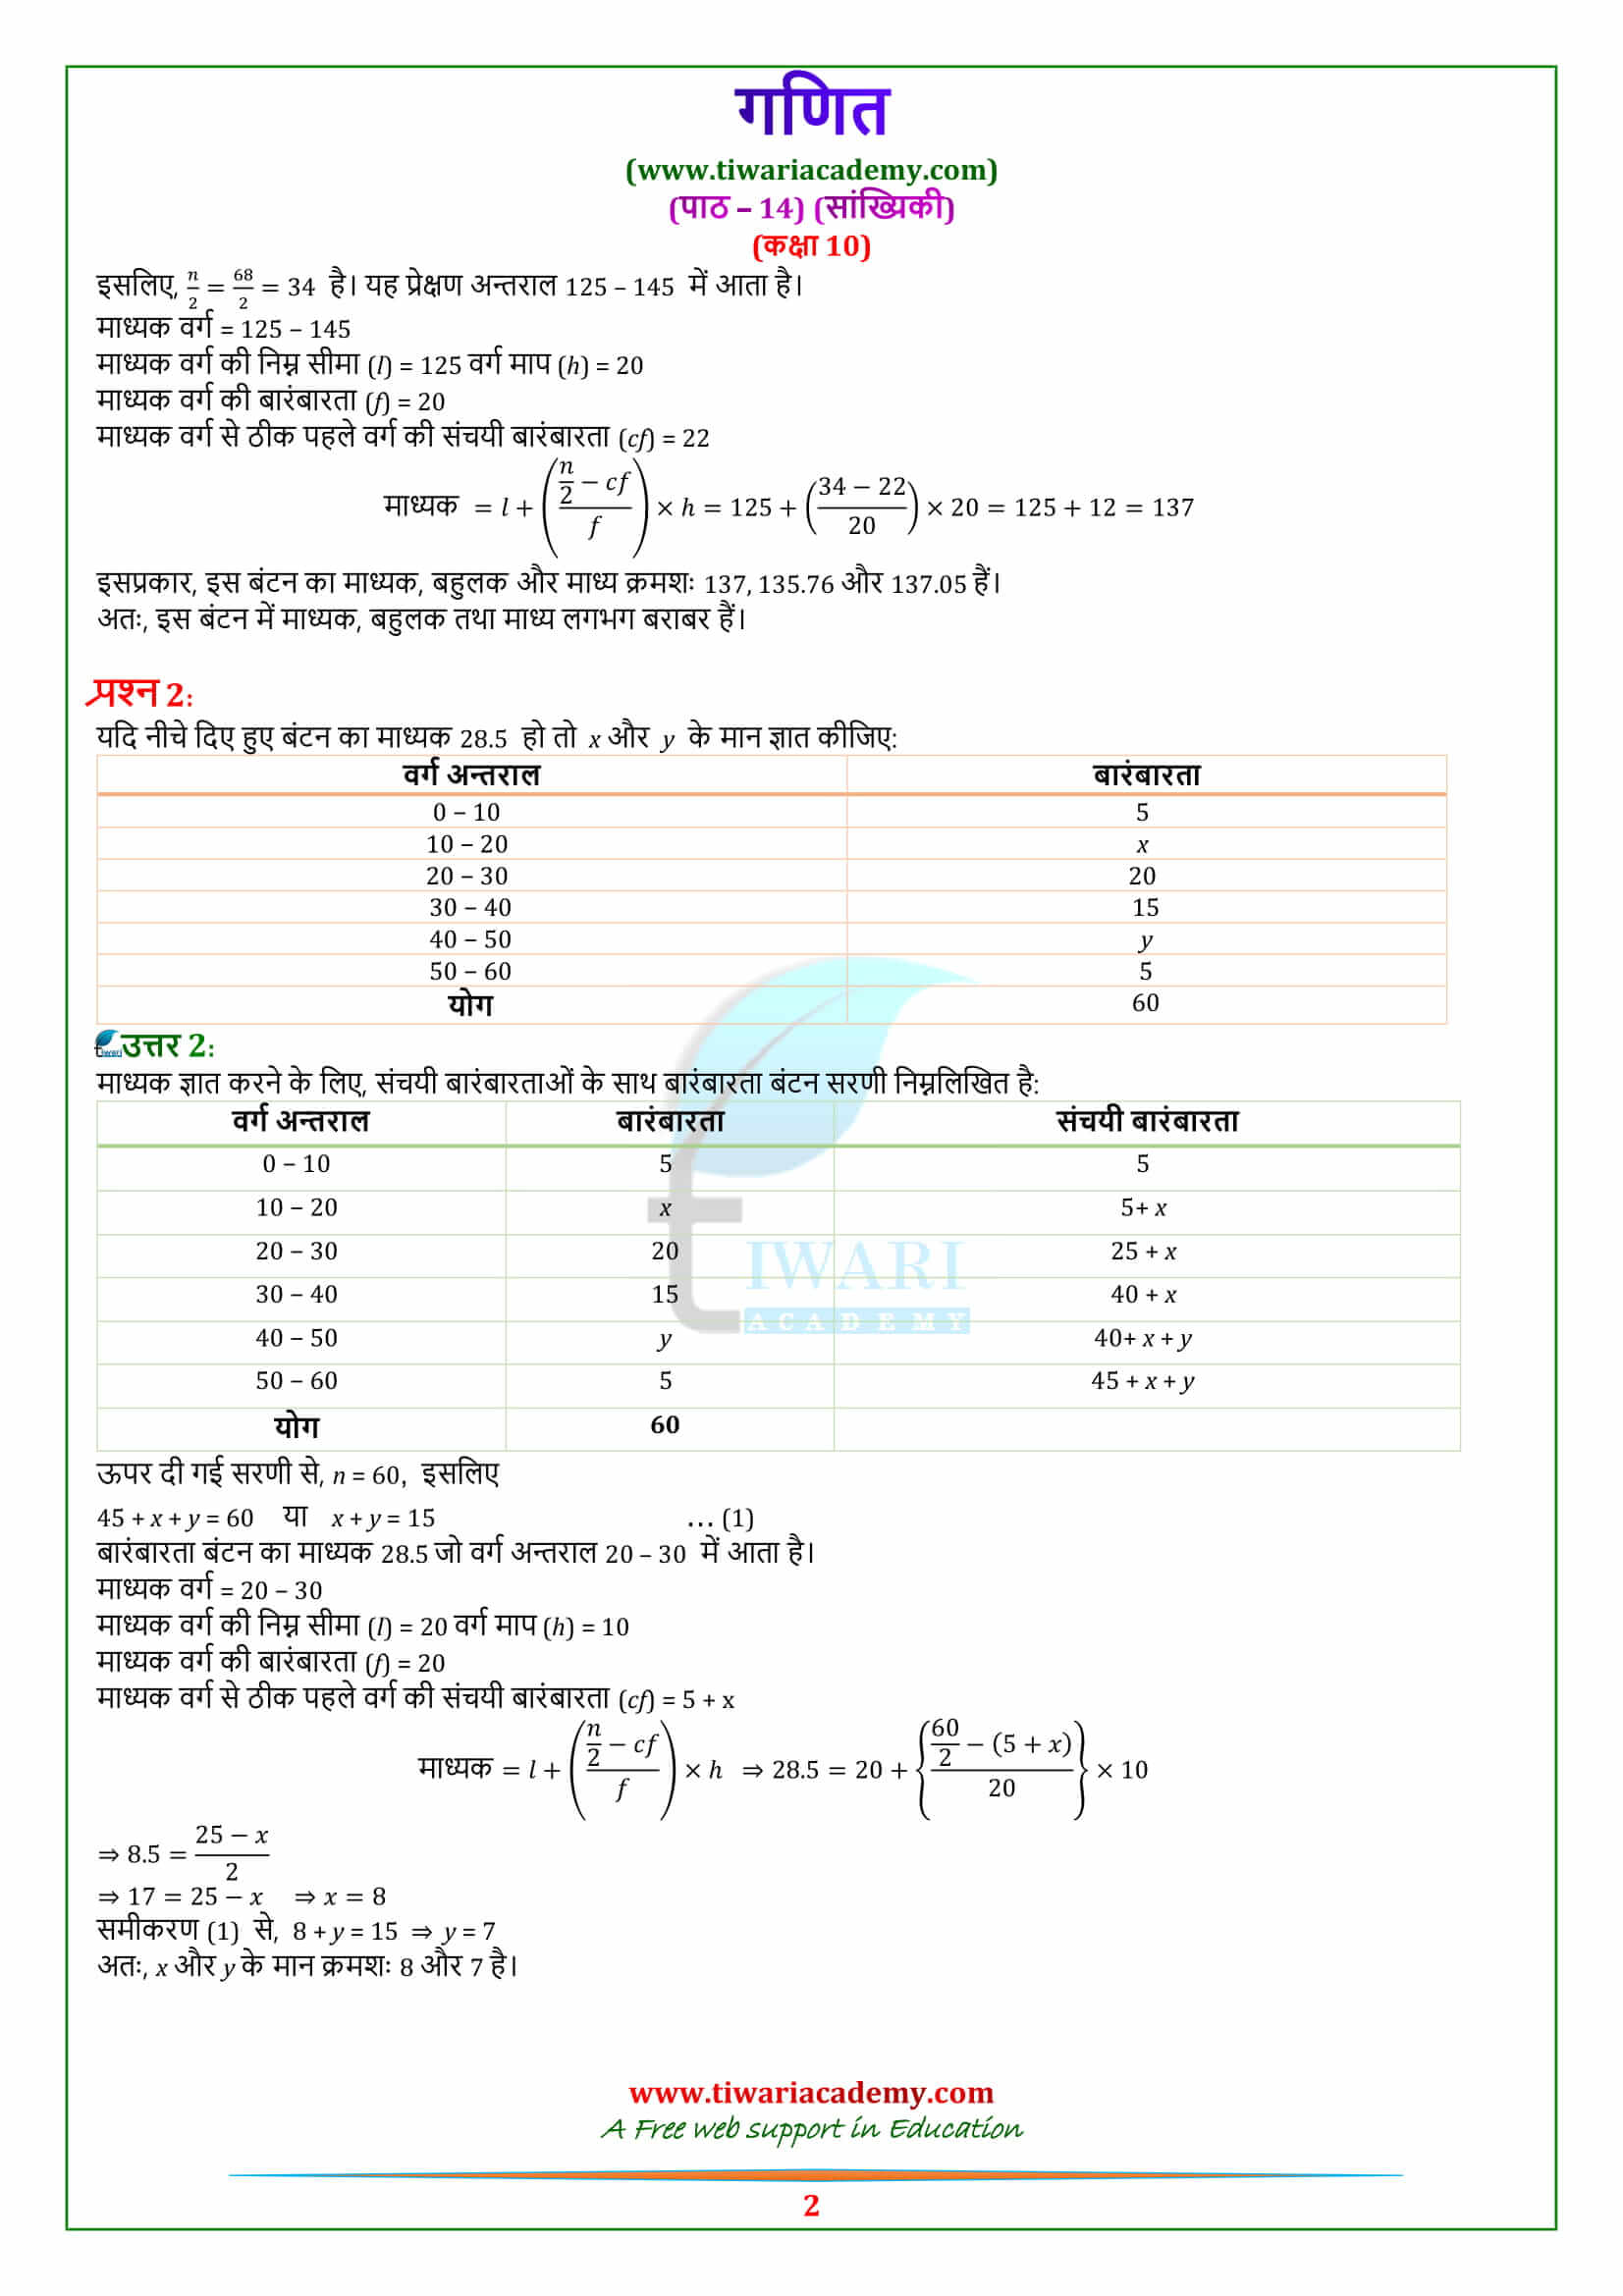 NCERT Solutions for class 10 Maths Chapter 14 Exercise 14.3 in hindi medium